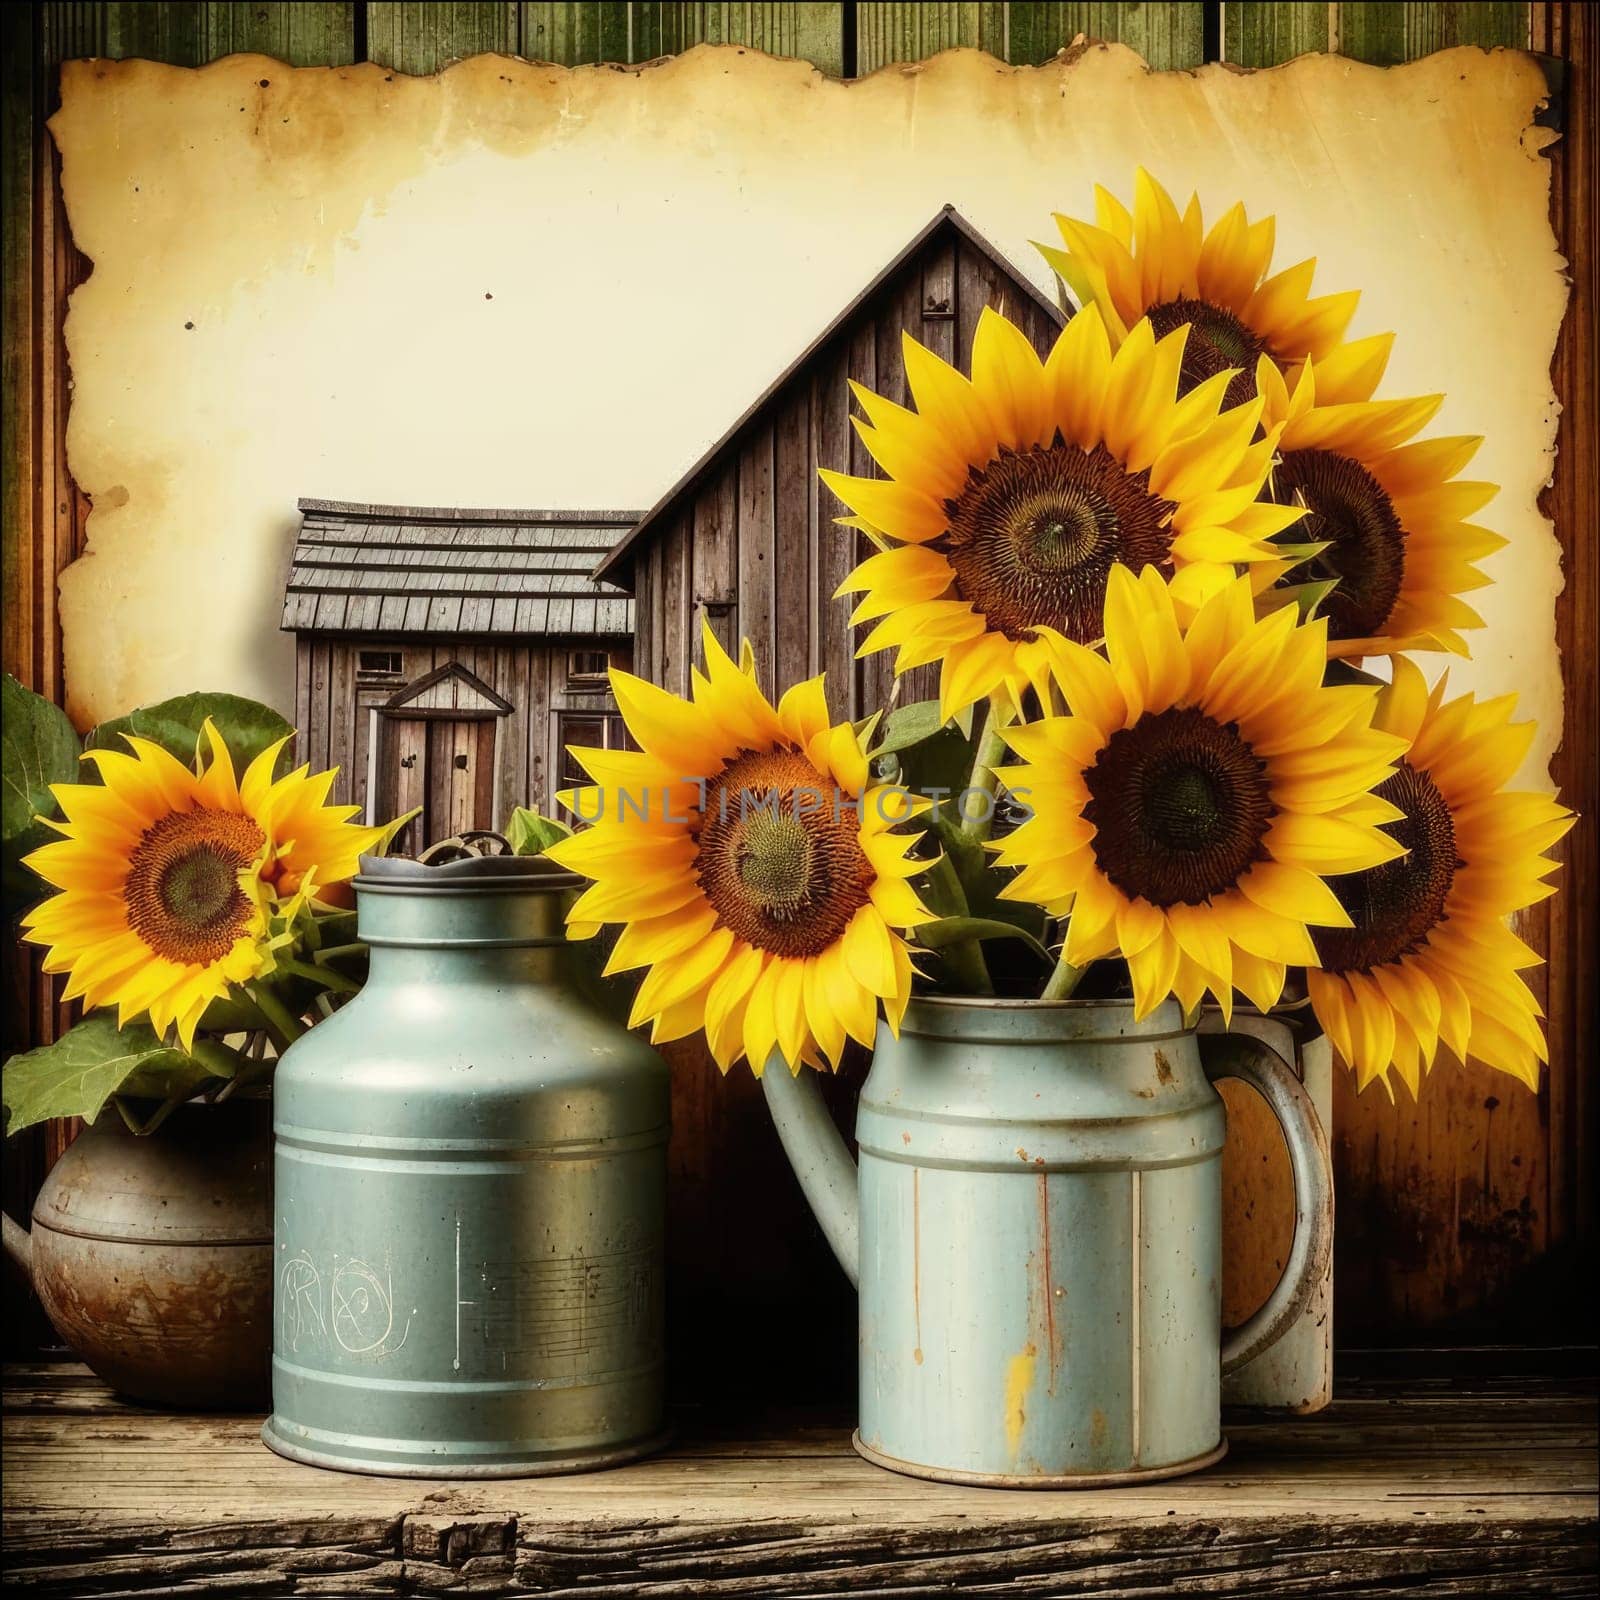 Vintage image of a rural farm wooden house with an antique milk can, a dilapidated barn, a bouquet of sunflowers. Junk journal. photograph with wear and tear. Country mood.